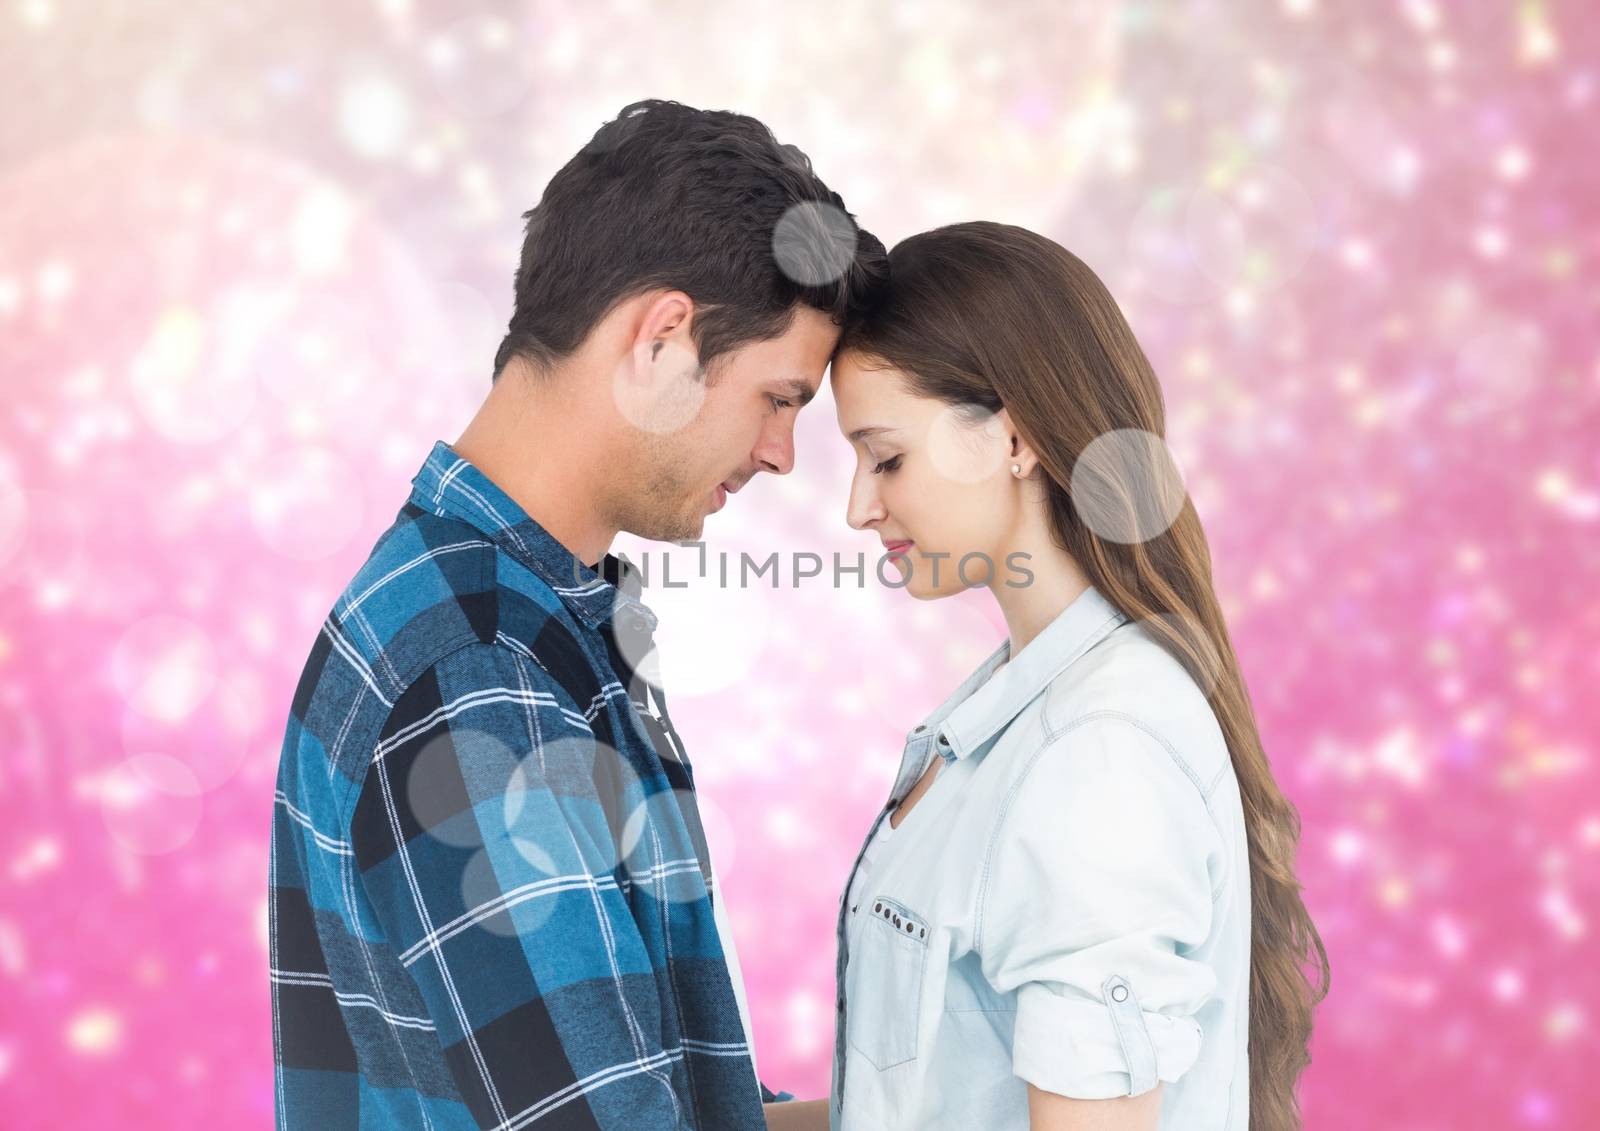 Composite image of romantic couple embracing each other against bokeh background